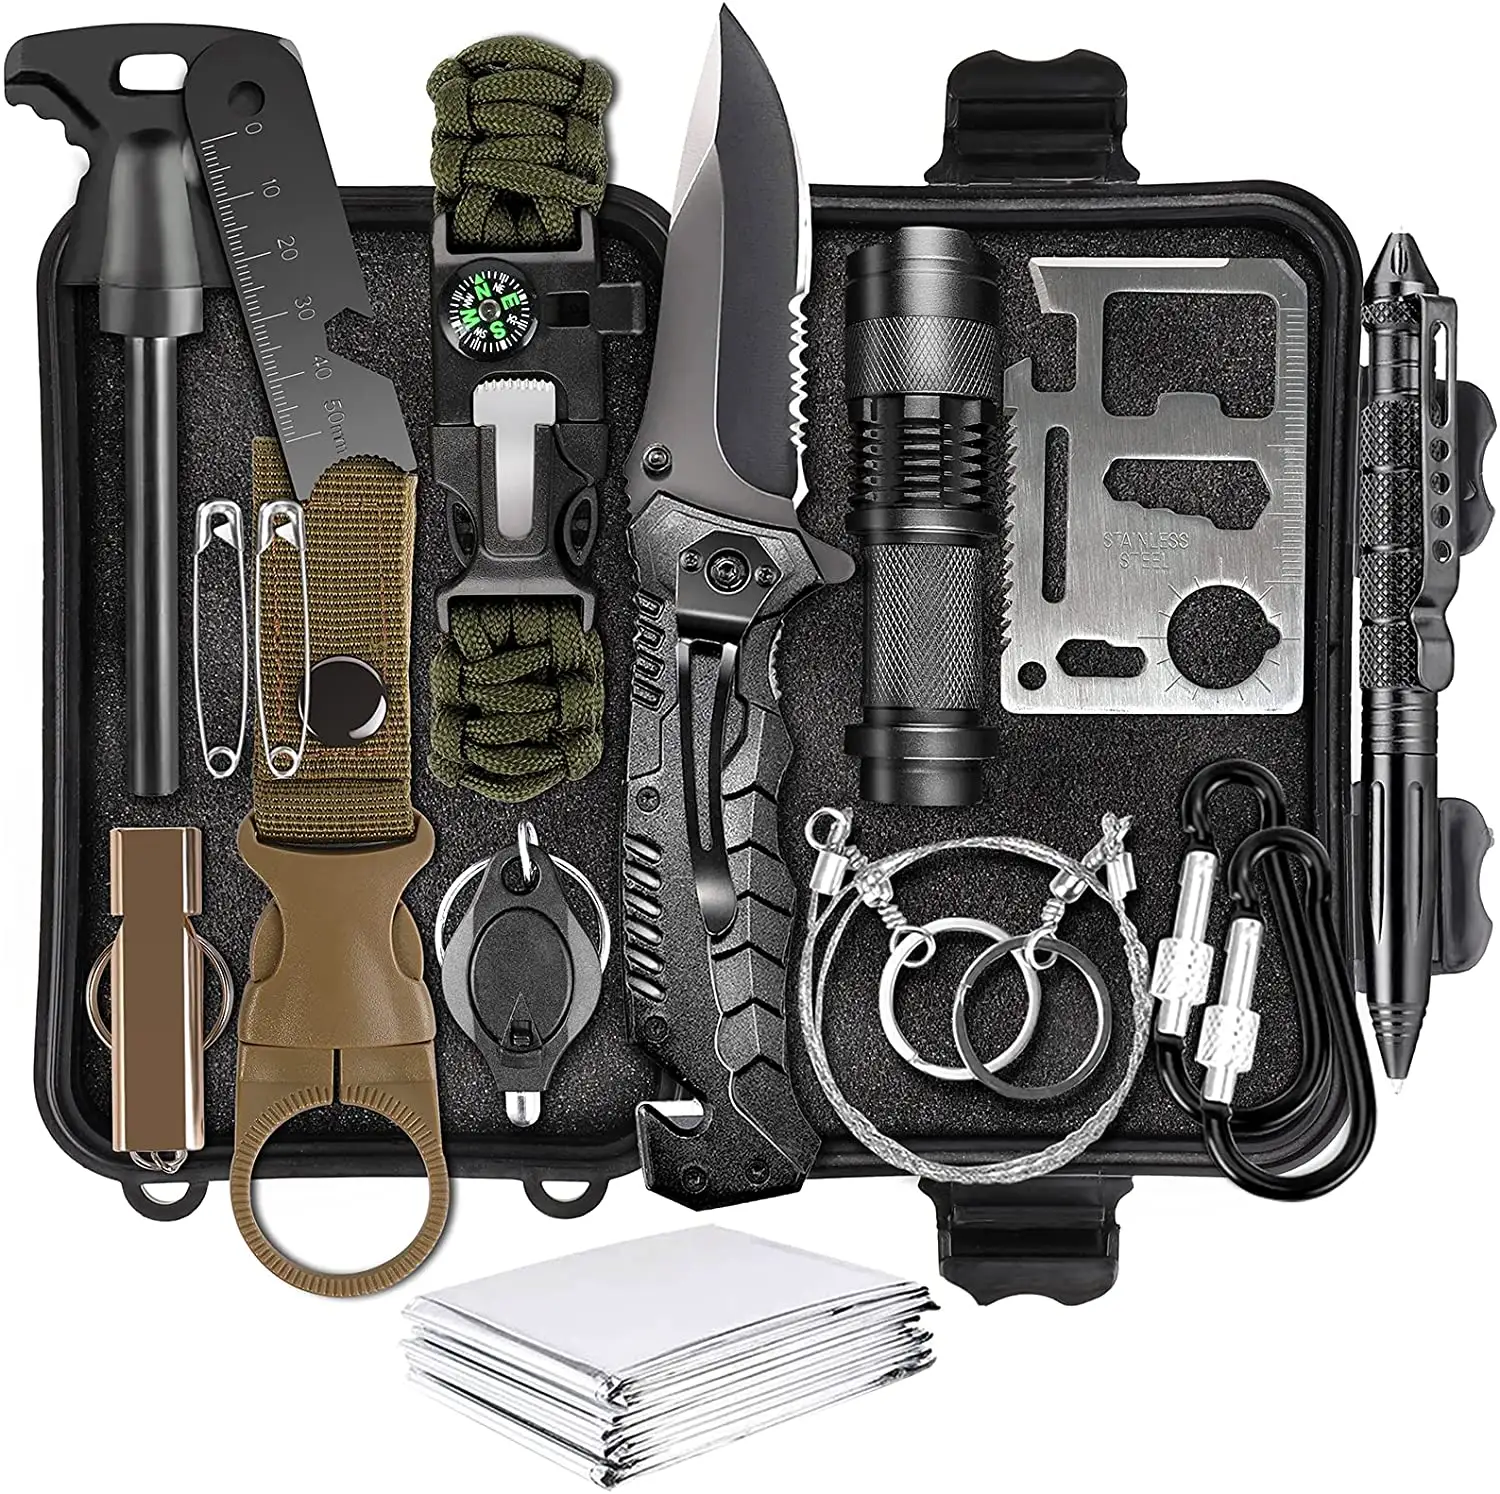 Wholesale 15 in 1 Emergency Survival Gear Kit Hiking , High Quality Gadgets Survival Kit Tool With Watch, Fire Starter Etc